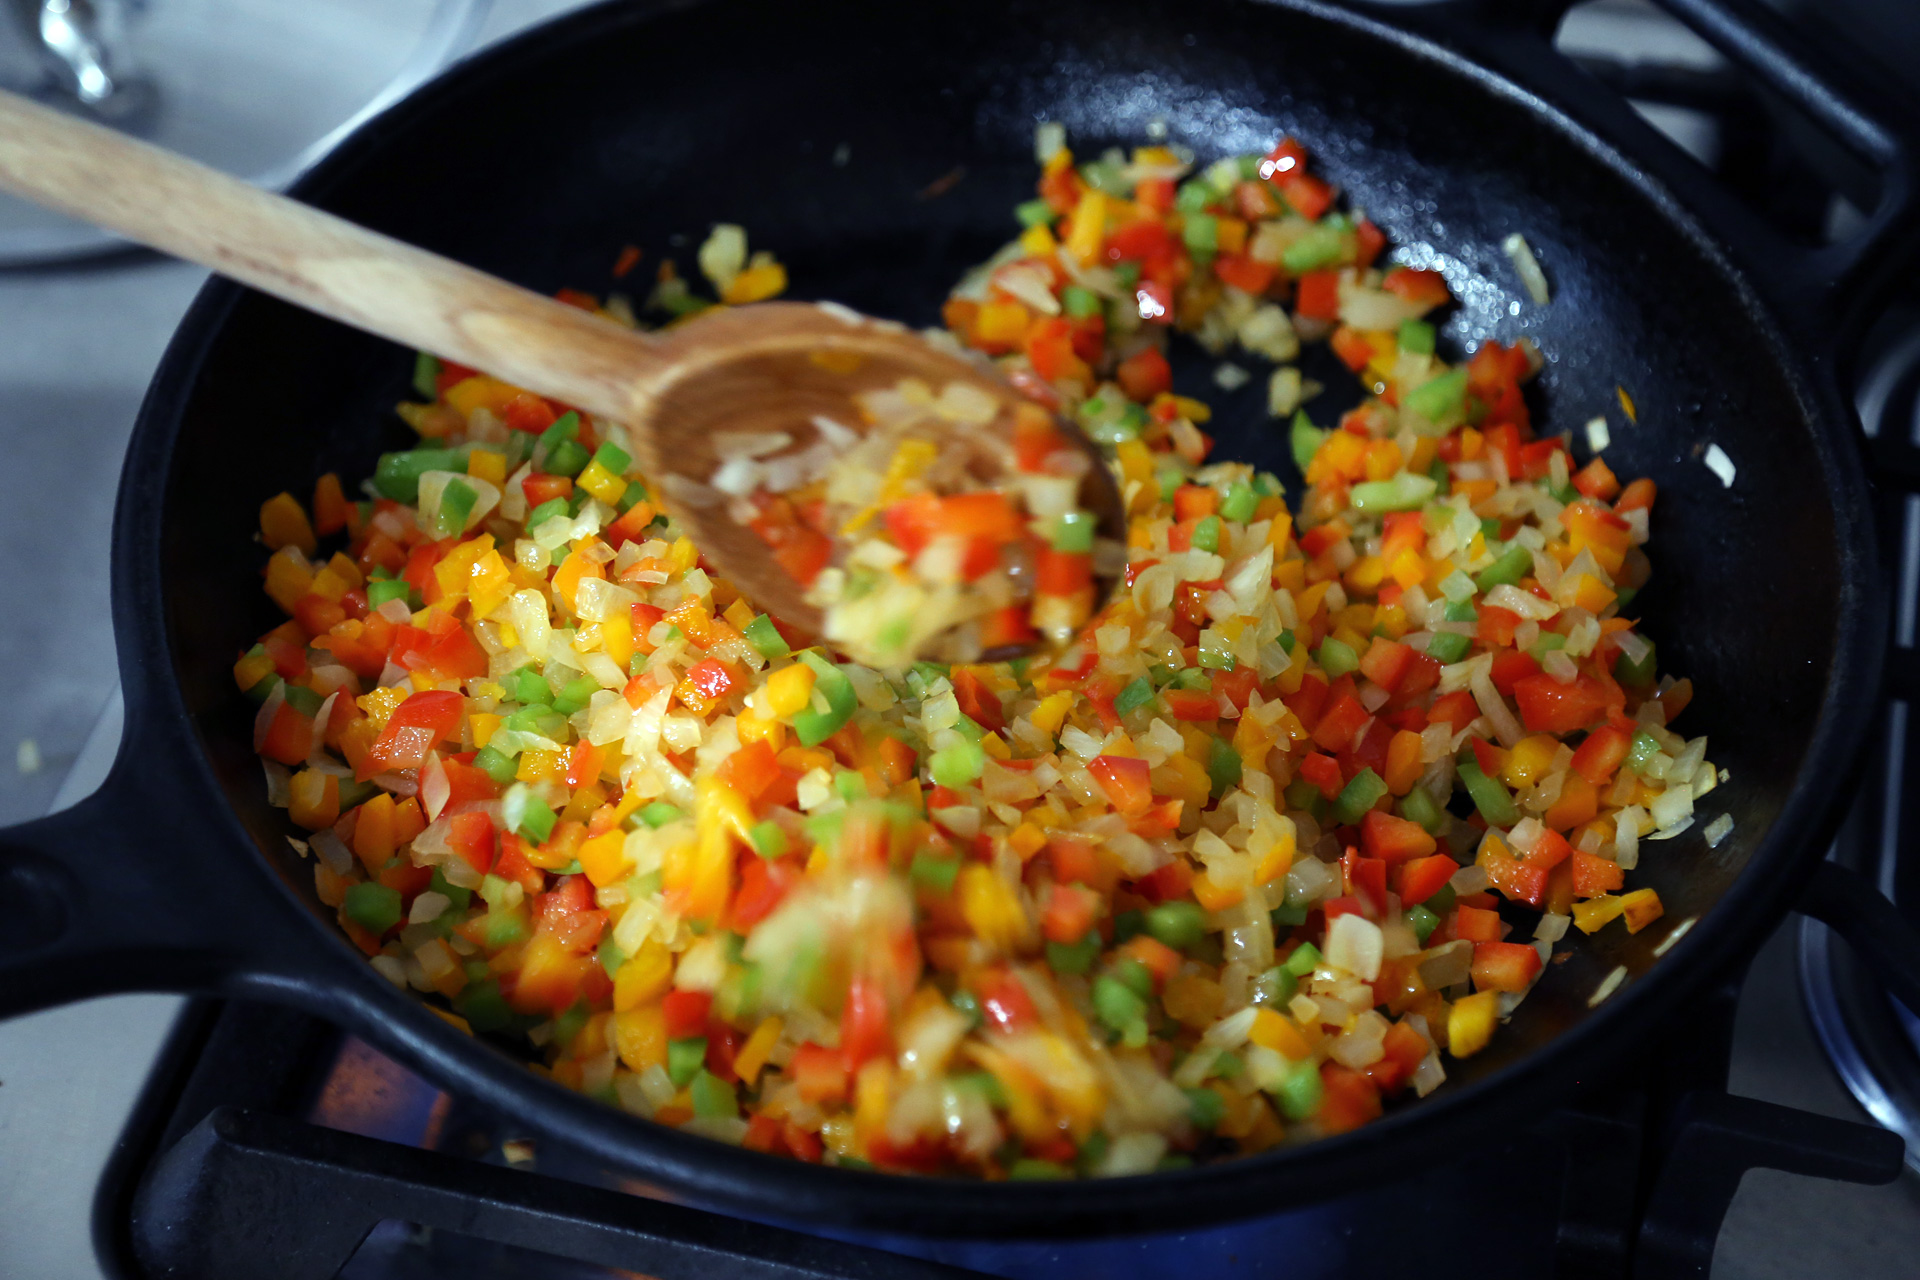 Cook, stirring, until the vegetables are really tender, about 8 minutes.